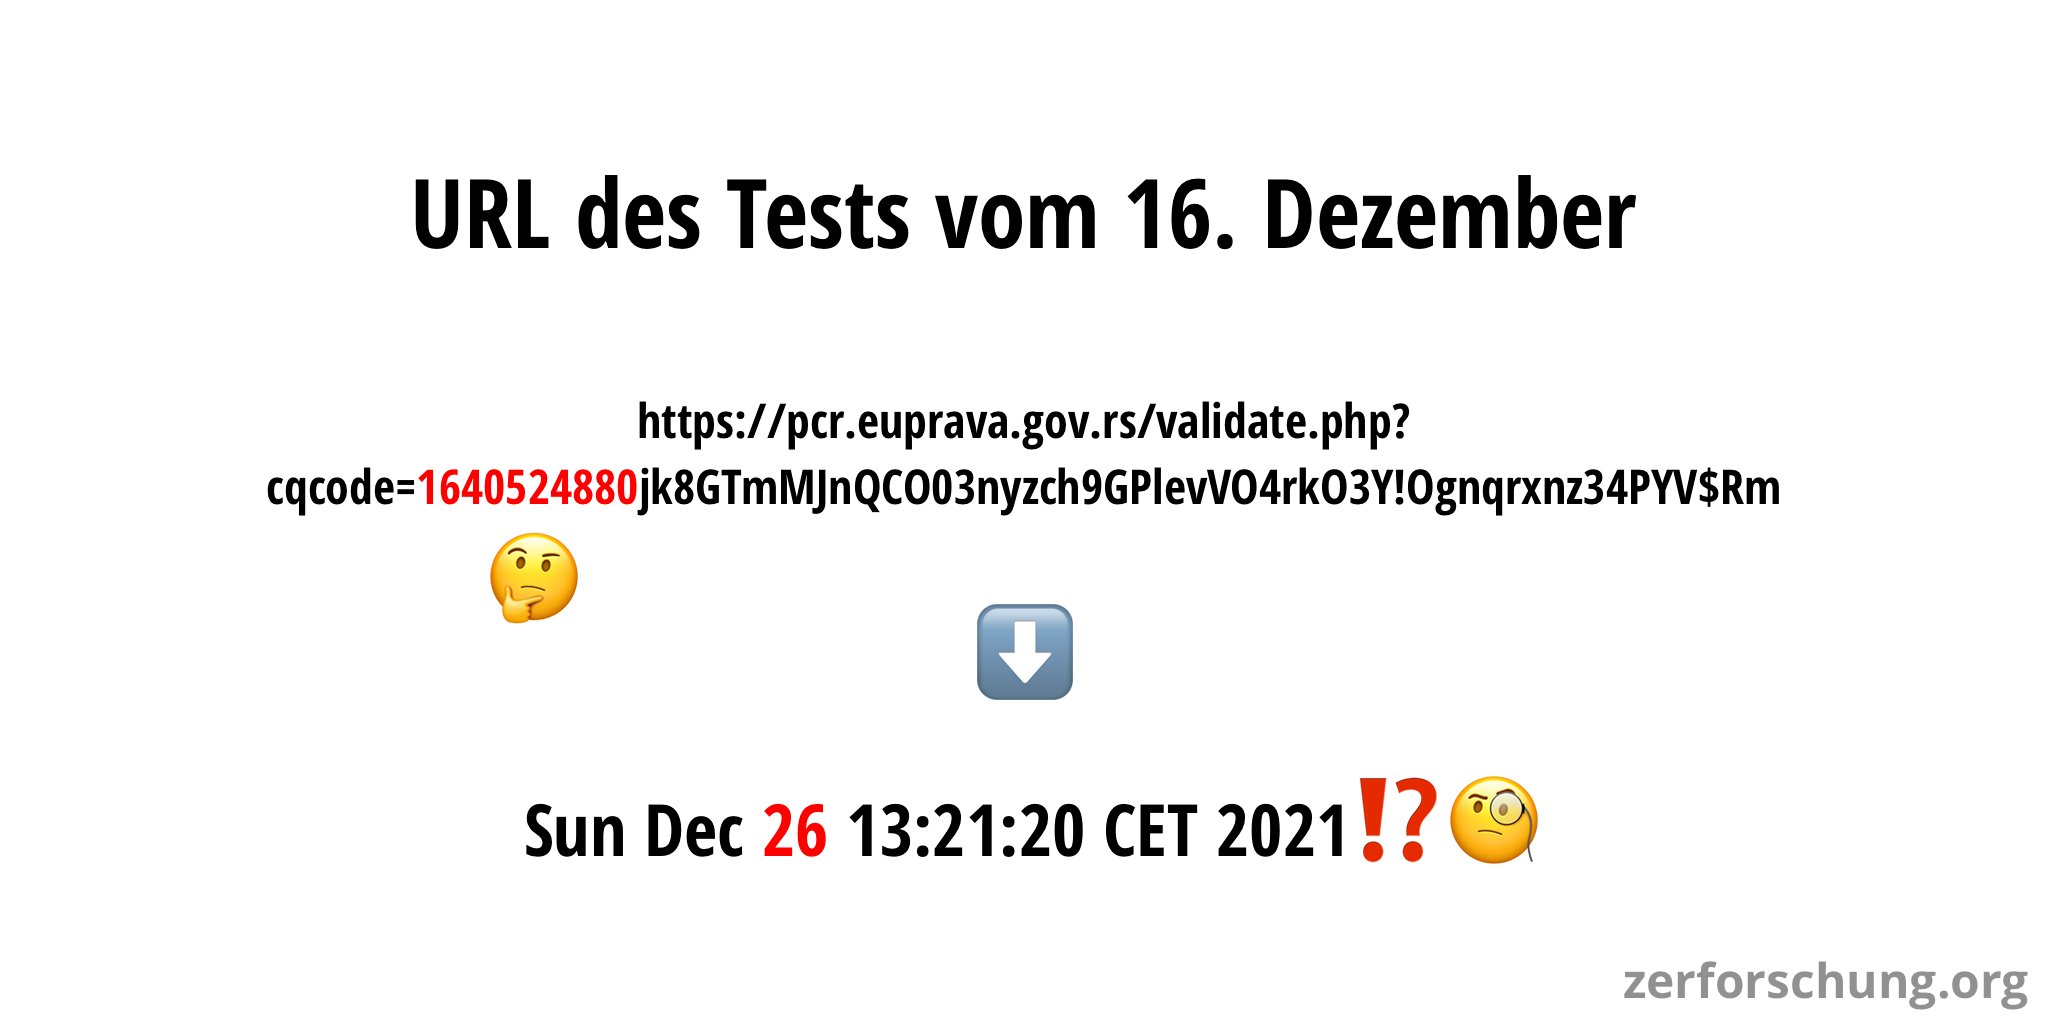 URL to the verification website of the December 16 test, with the timestamp section highlighted, as well as the readable representation: Sun, 26 Dec 2021 13:21:20 CET